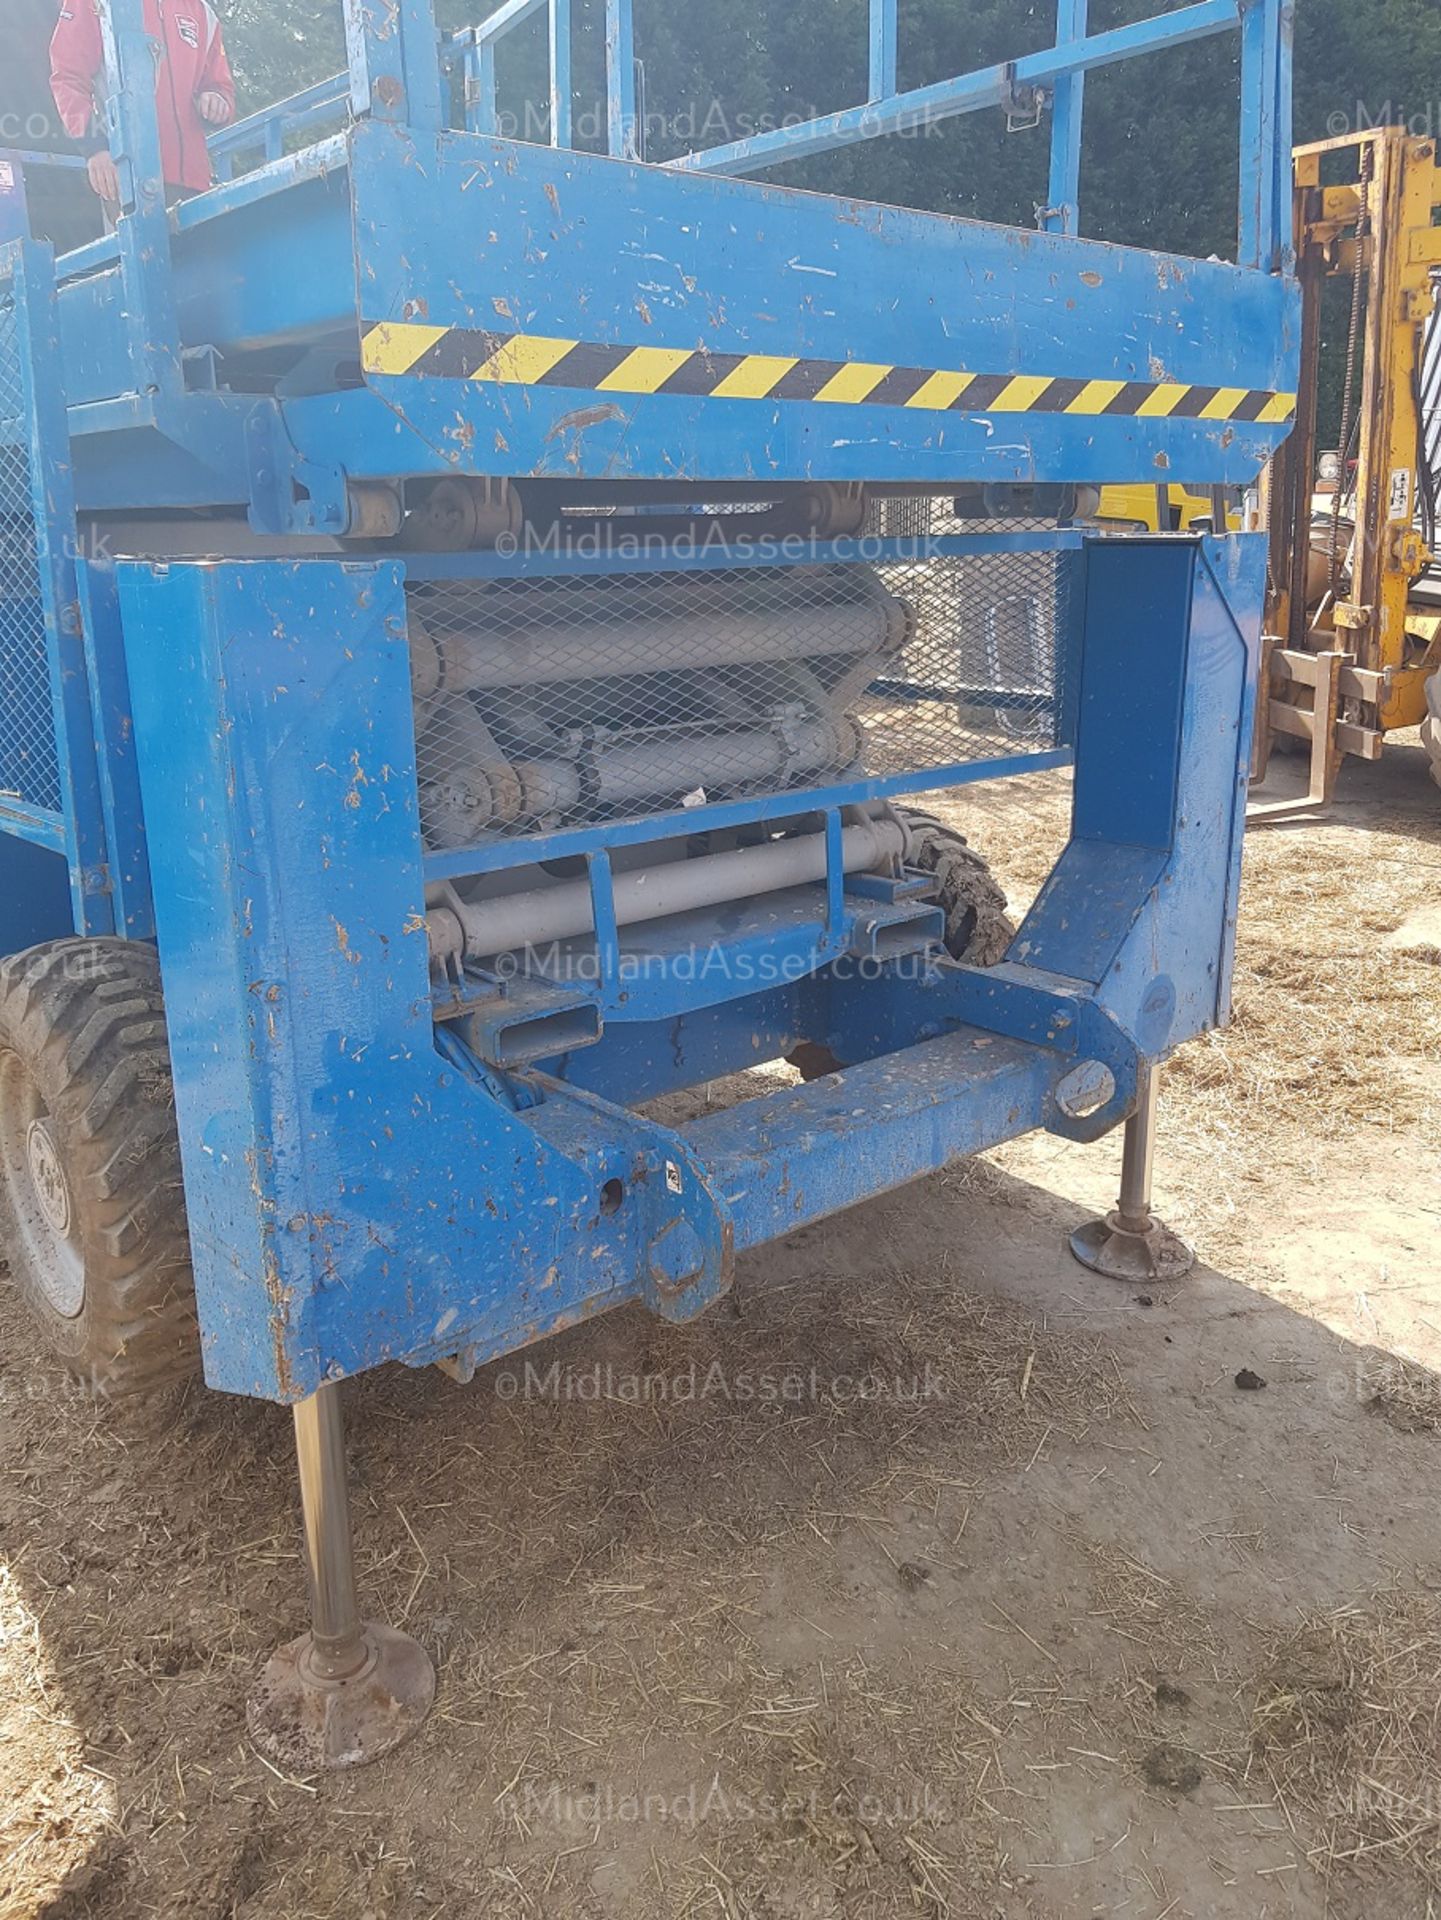 2004 GENIE GS-3384 ROUGH TERRAIN SCISSOR LIFT AUTO LEVELLING 4WD. STARTS, DRIVES AND LIFTS - Image 5 of 10